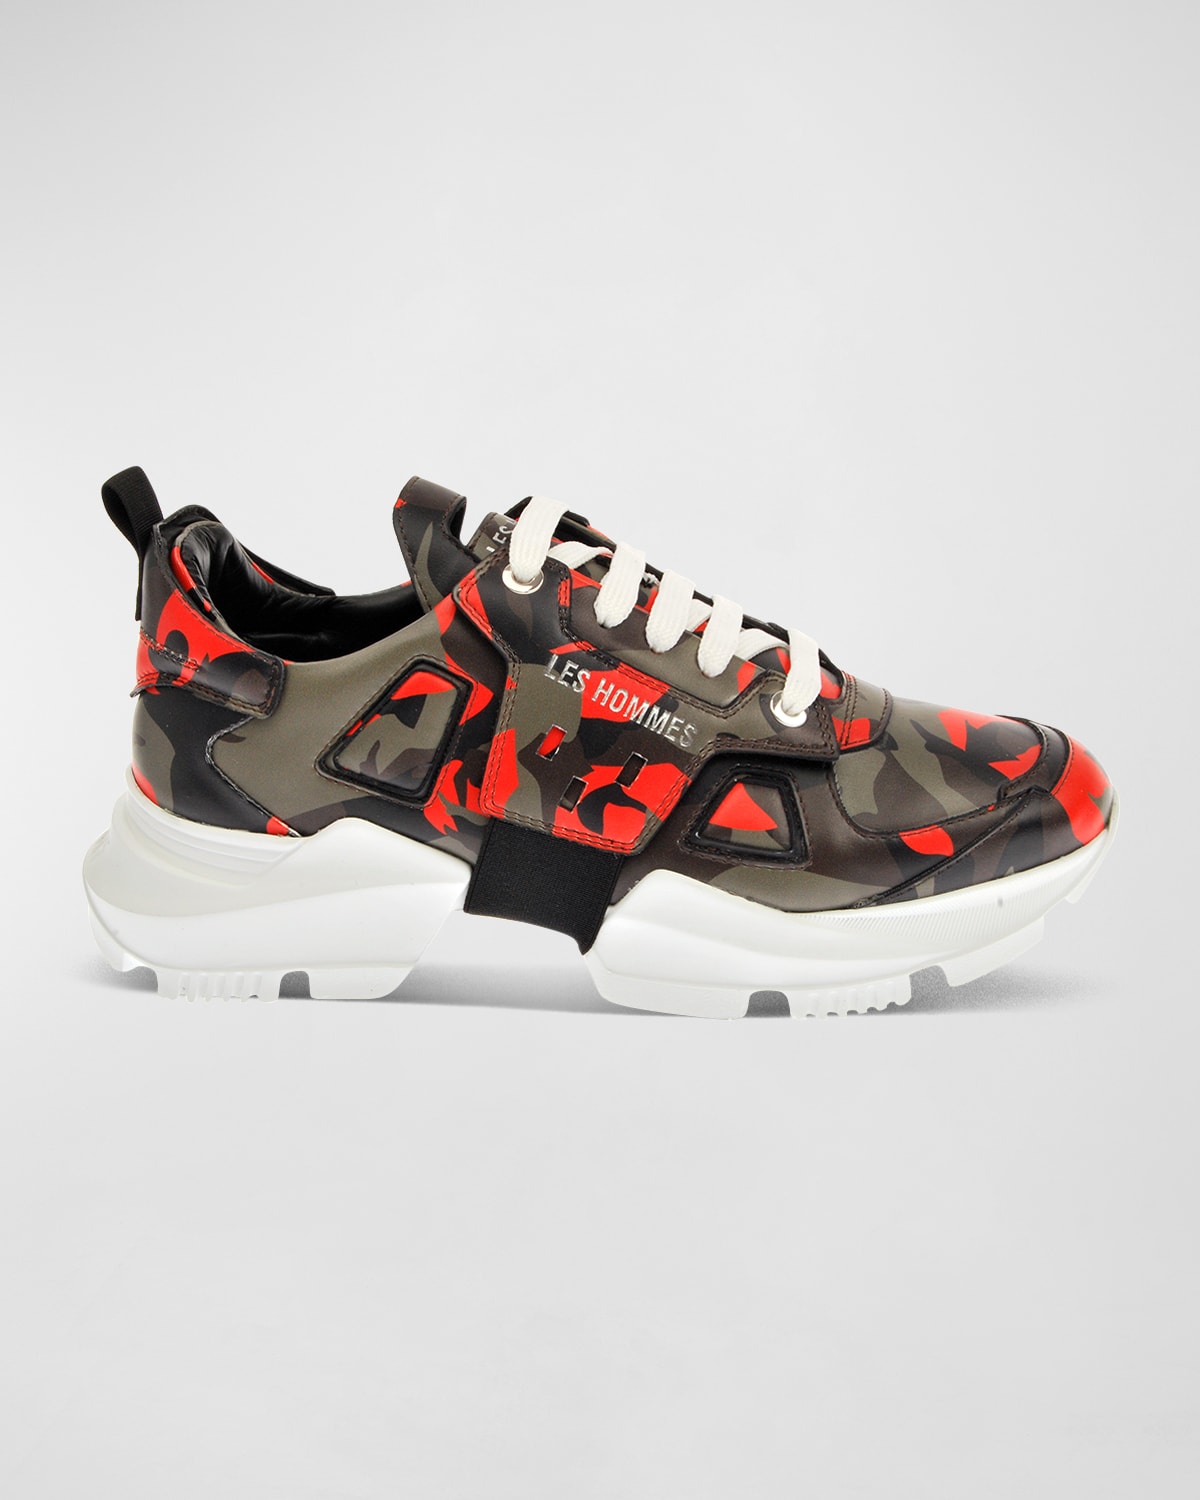 Les Hommes Men's Chunky Sole Camouflage Leather Low-top Sneakers